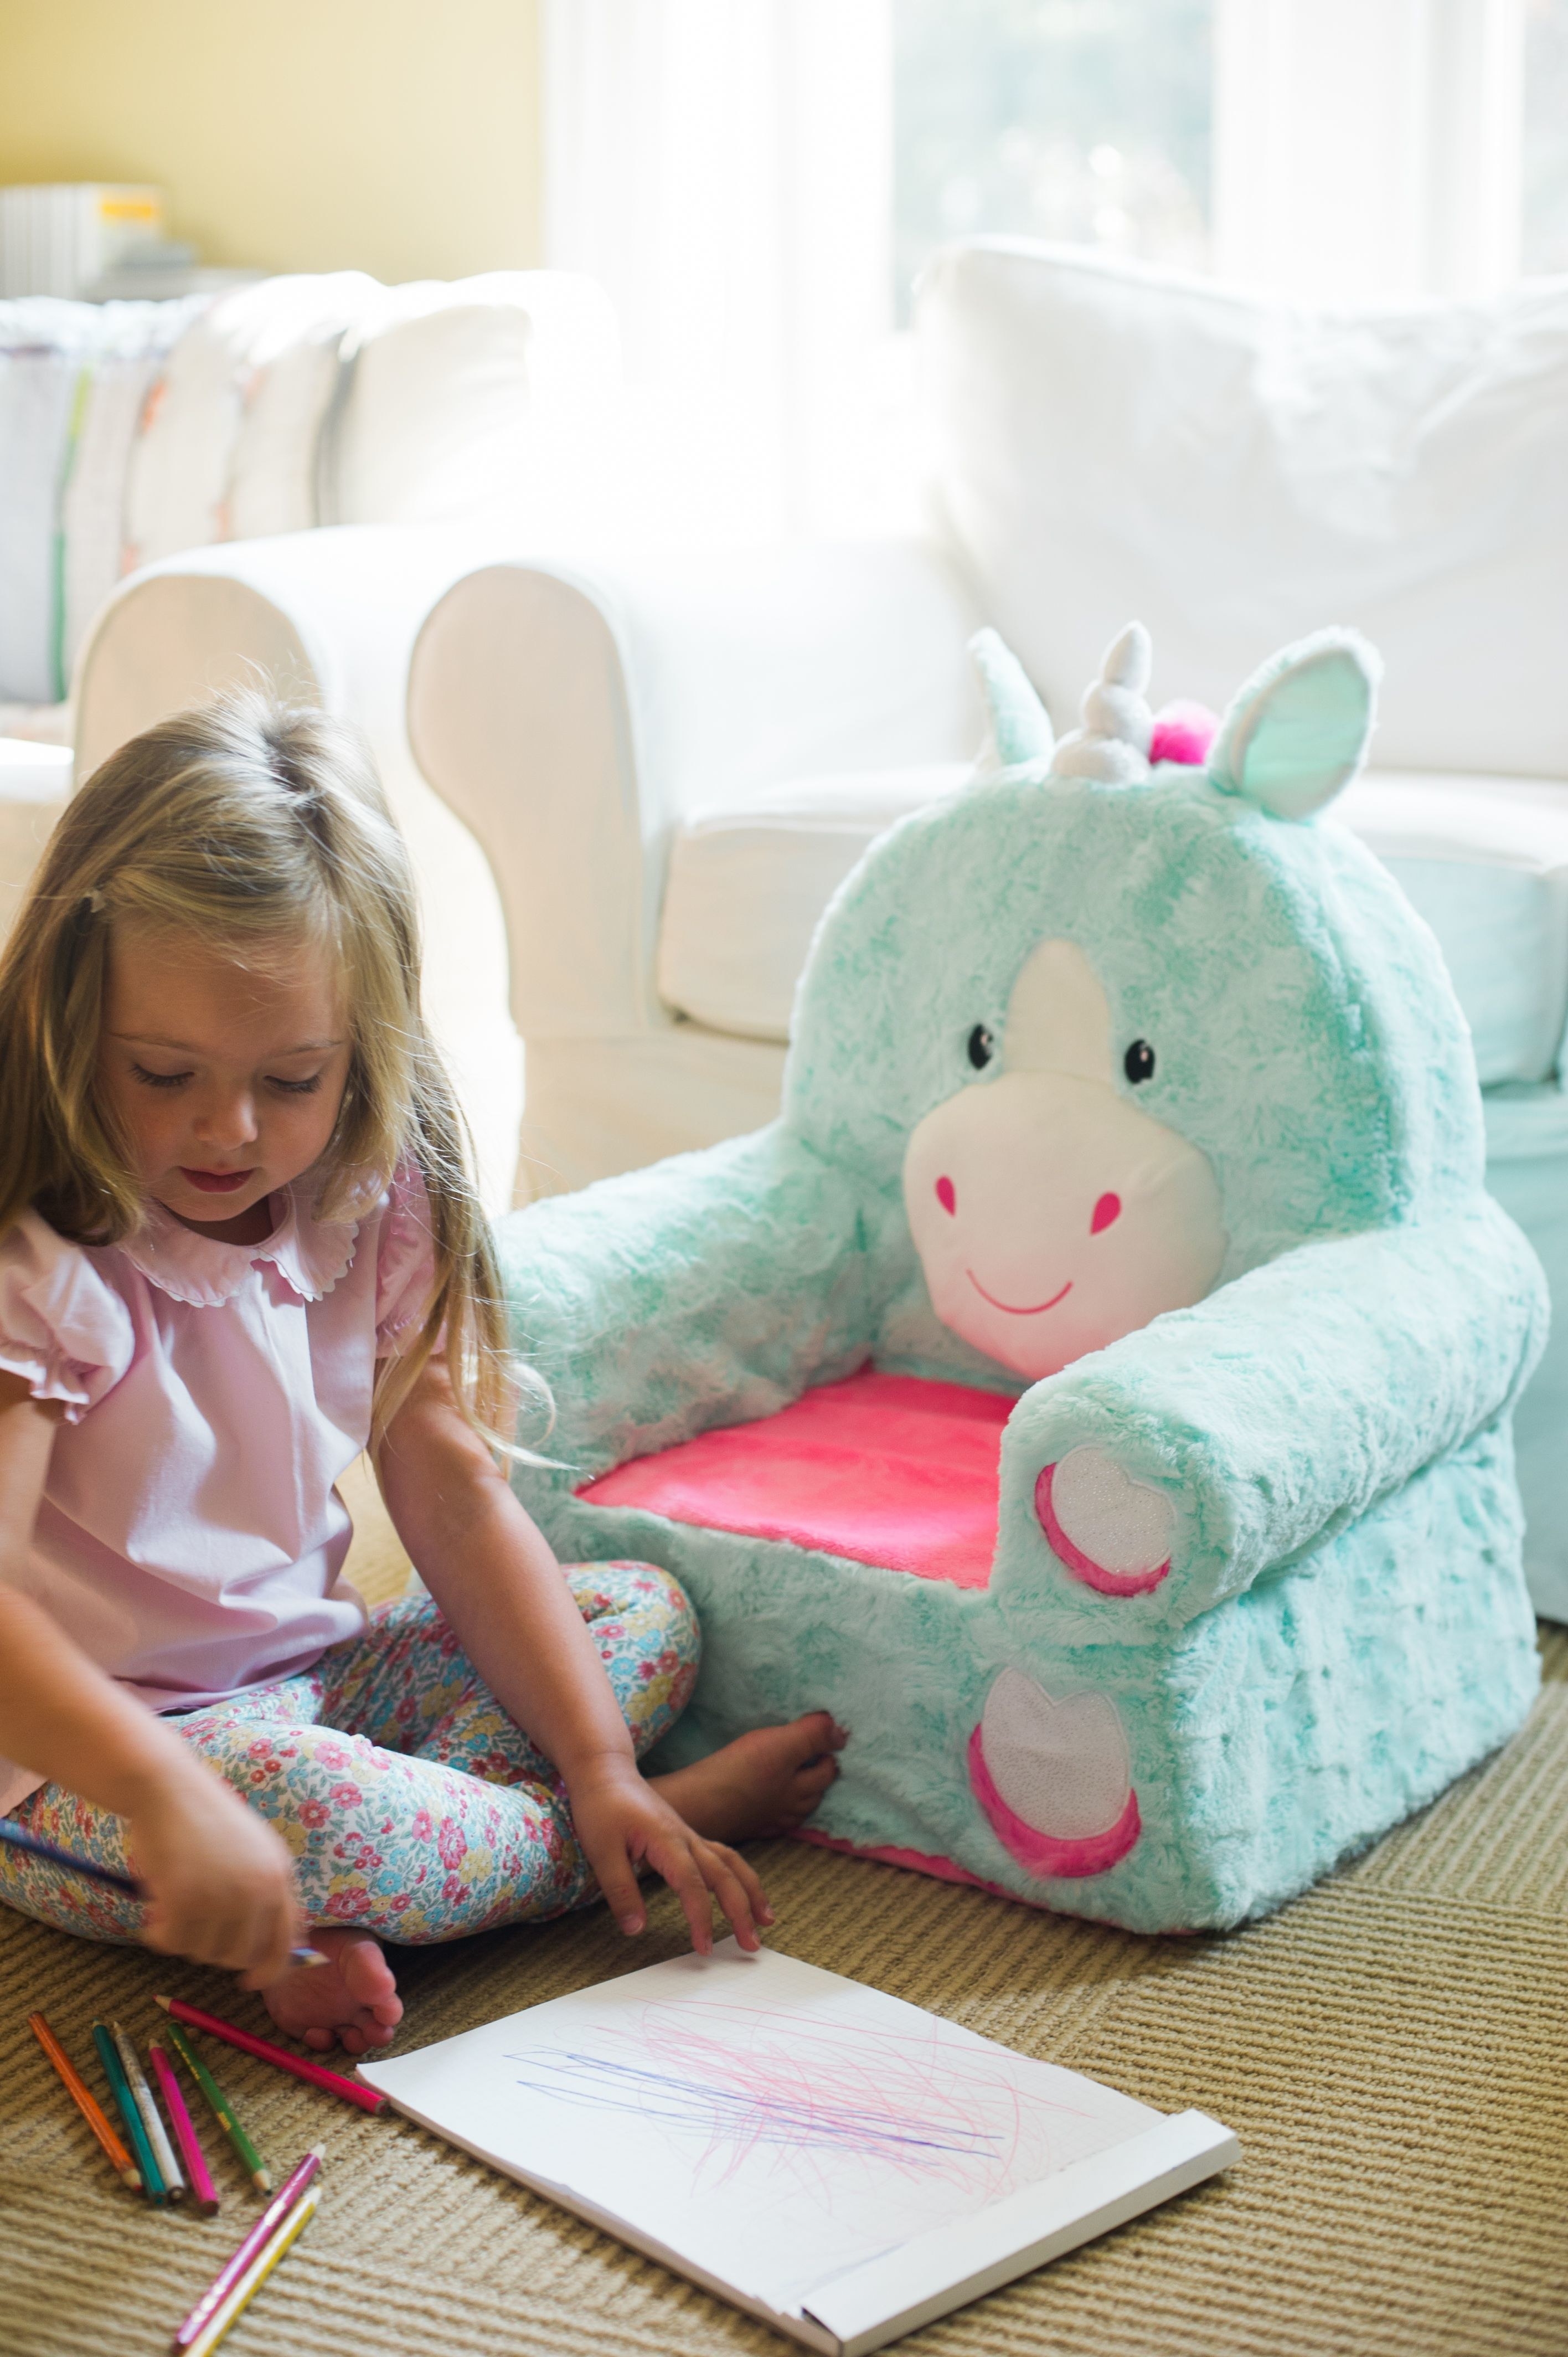 A turquoise and pink plush unicorn chair next to a child